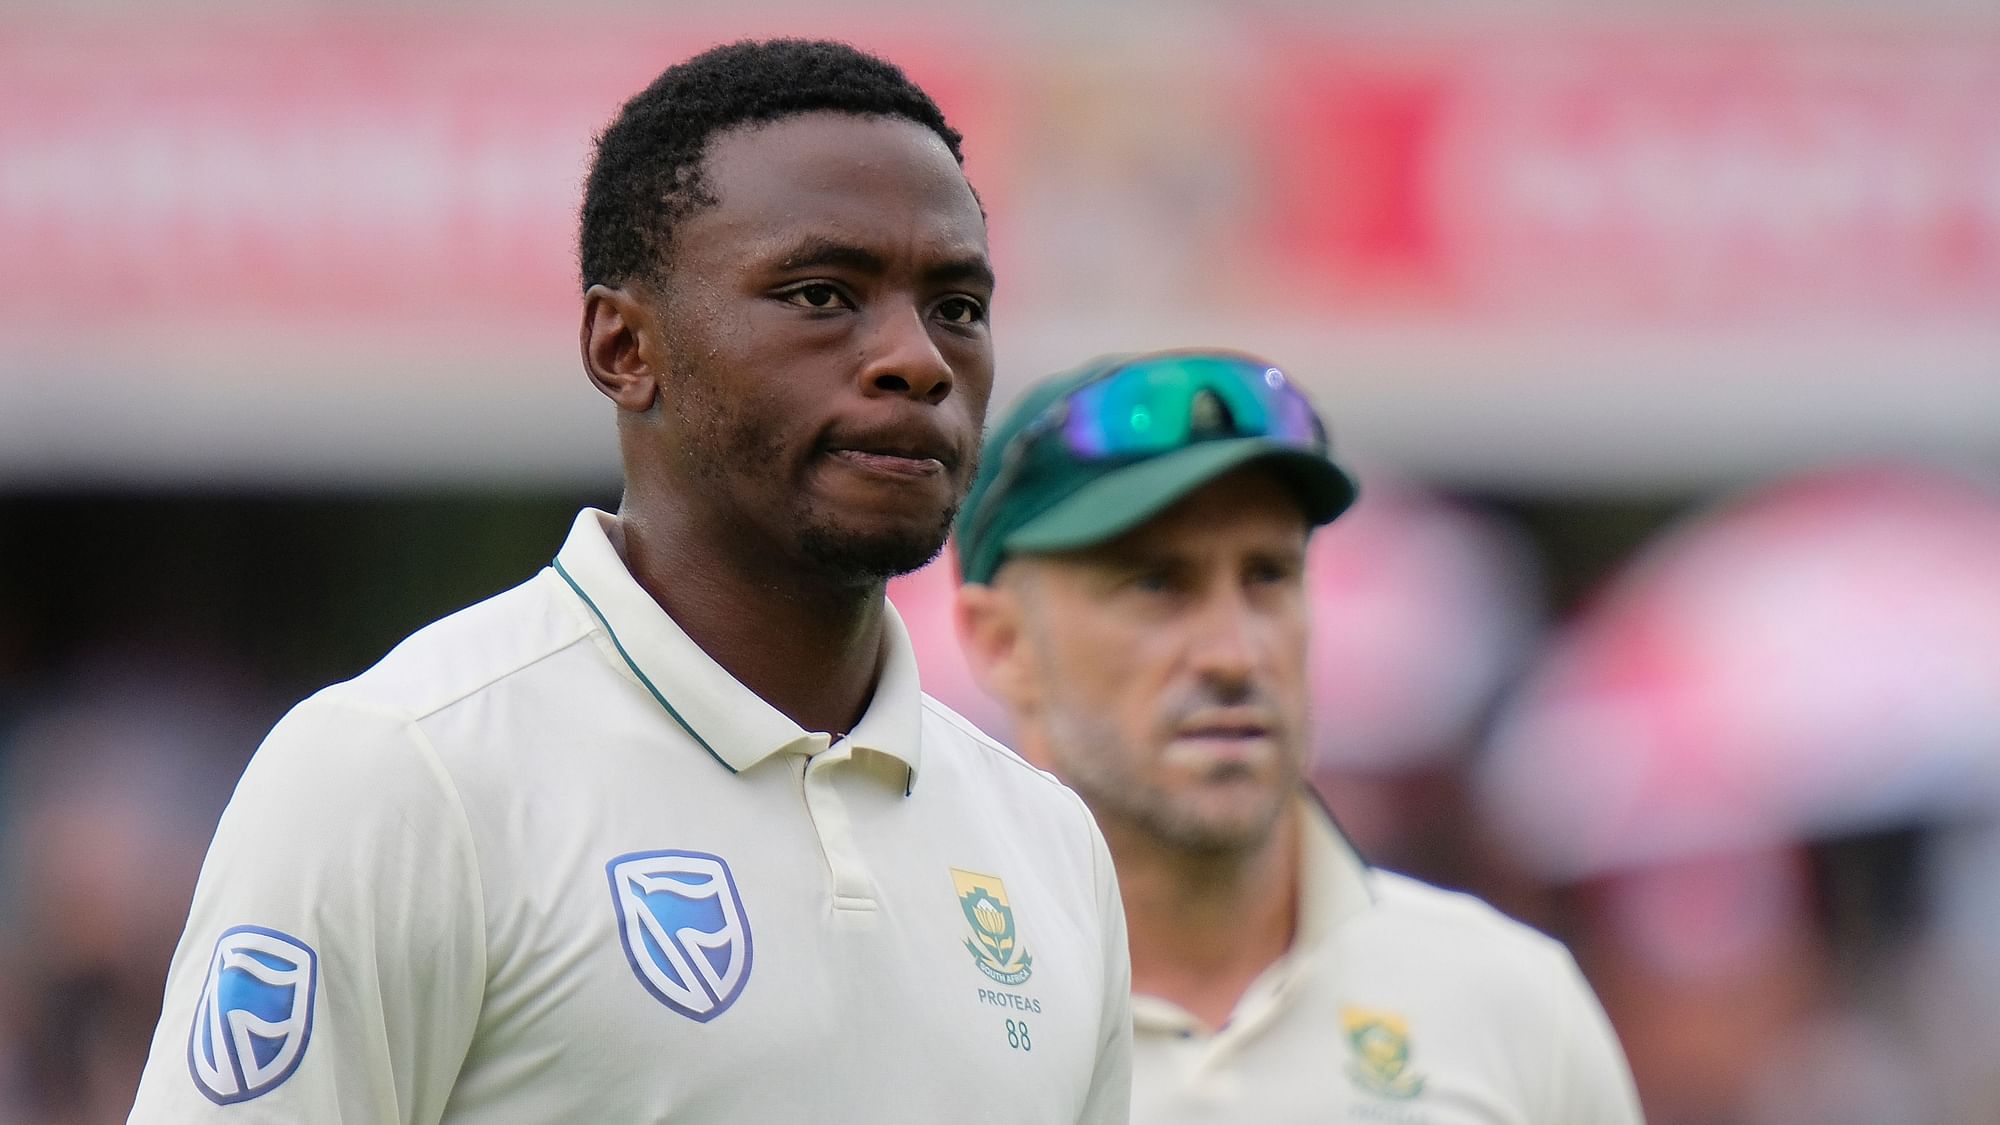  Kagiso Rabada of South Africa will miss one Test match after violating Article 2.5 of the ICC’s code of conduct.